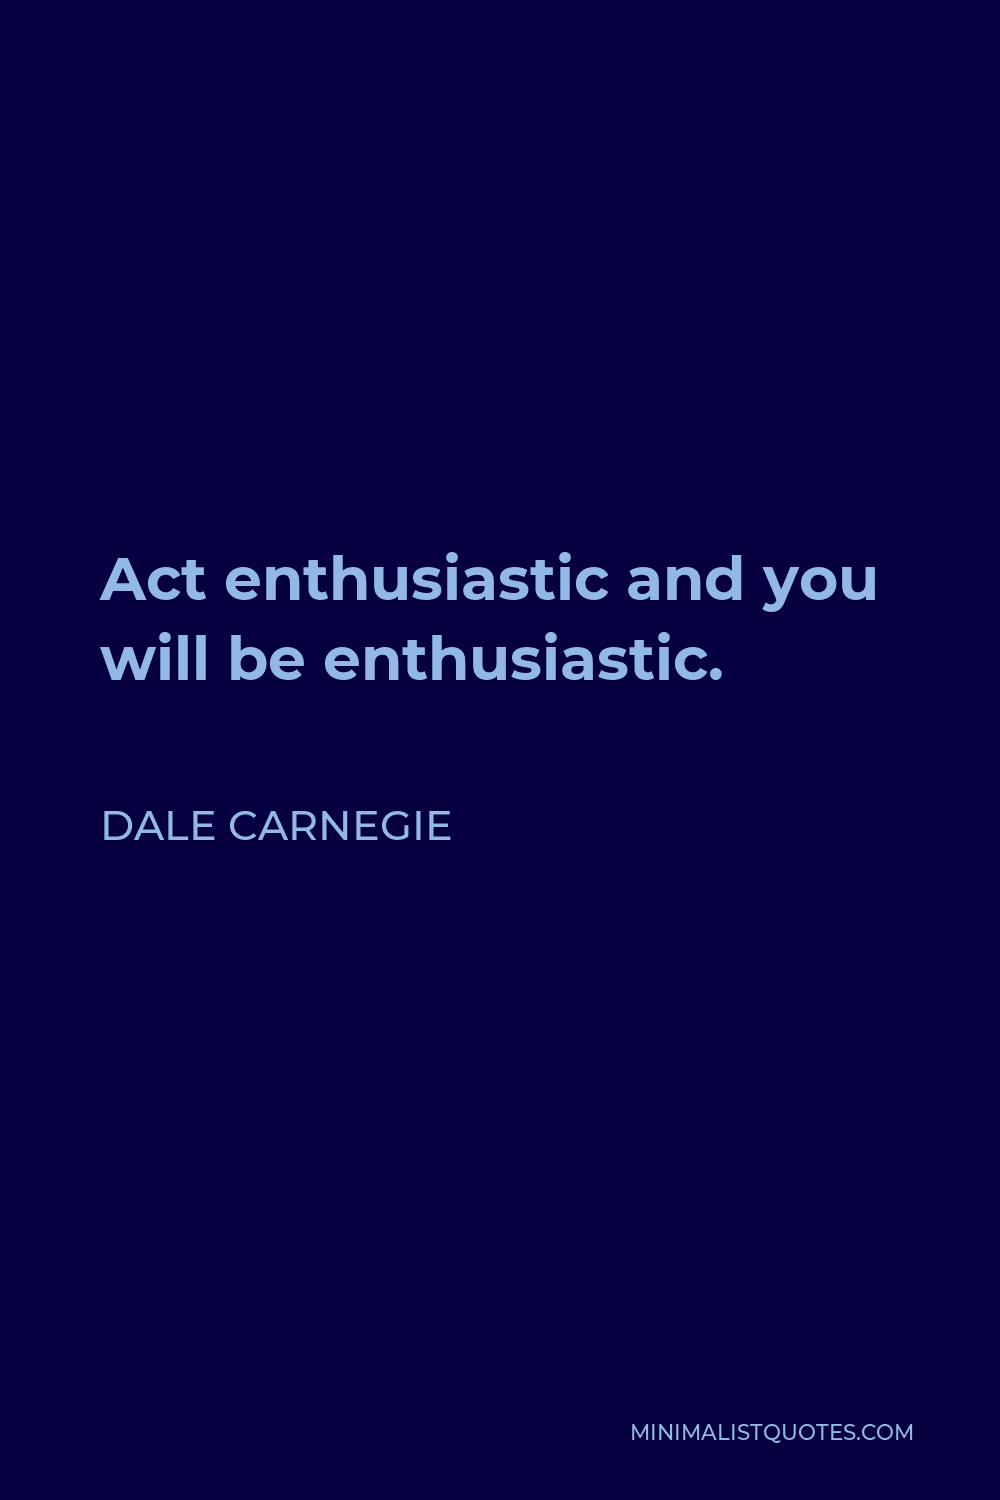 Dale Carnegie Quote - Act enthusiastic and you will be enthusiastic.